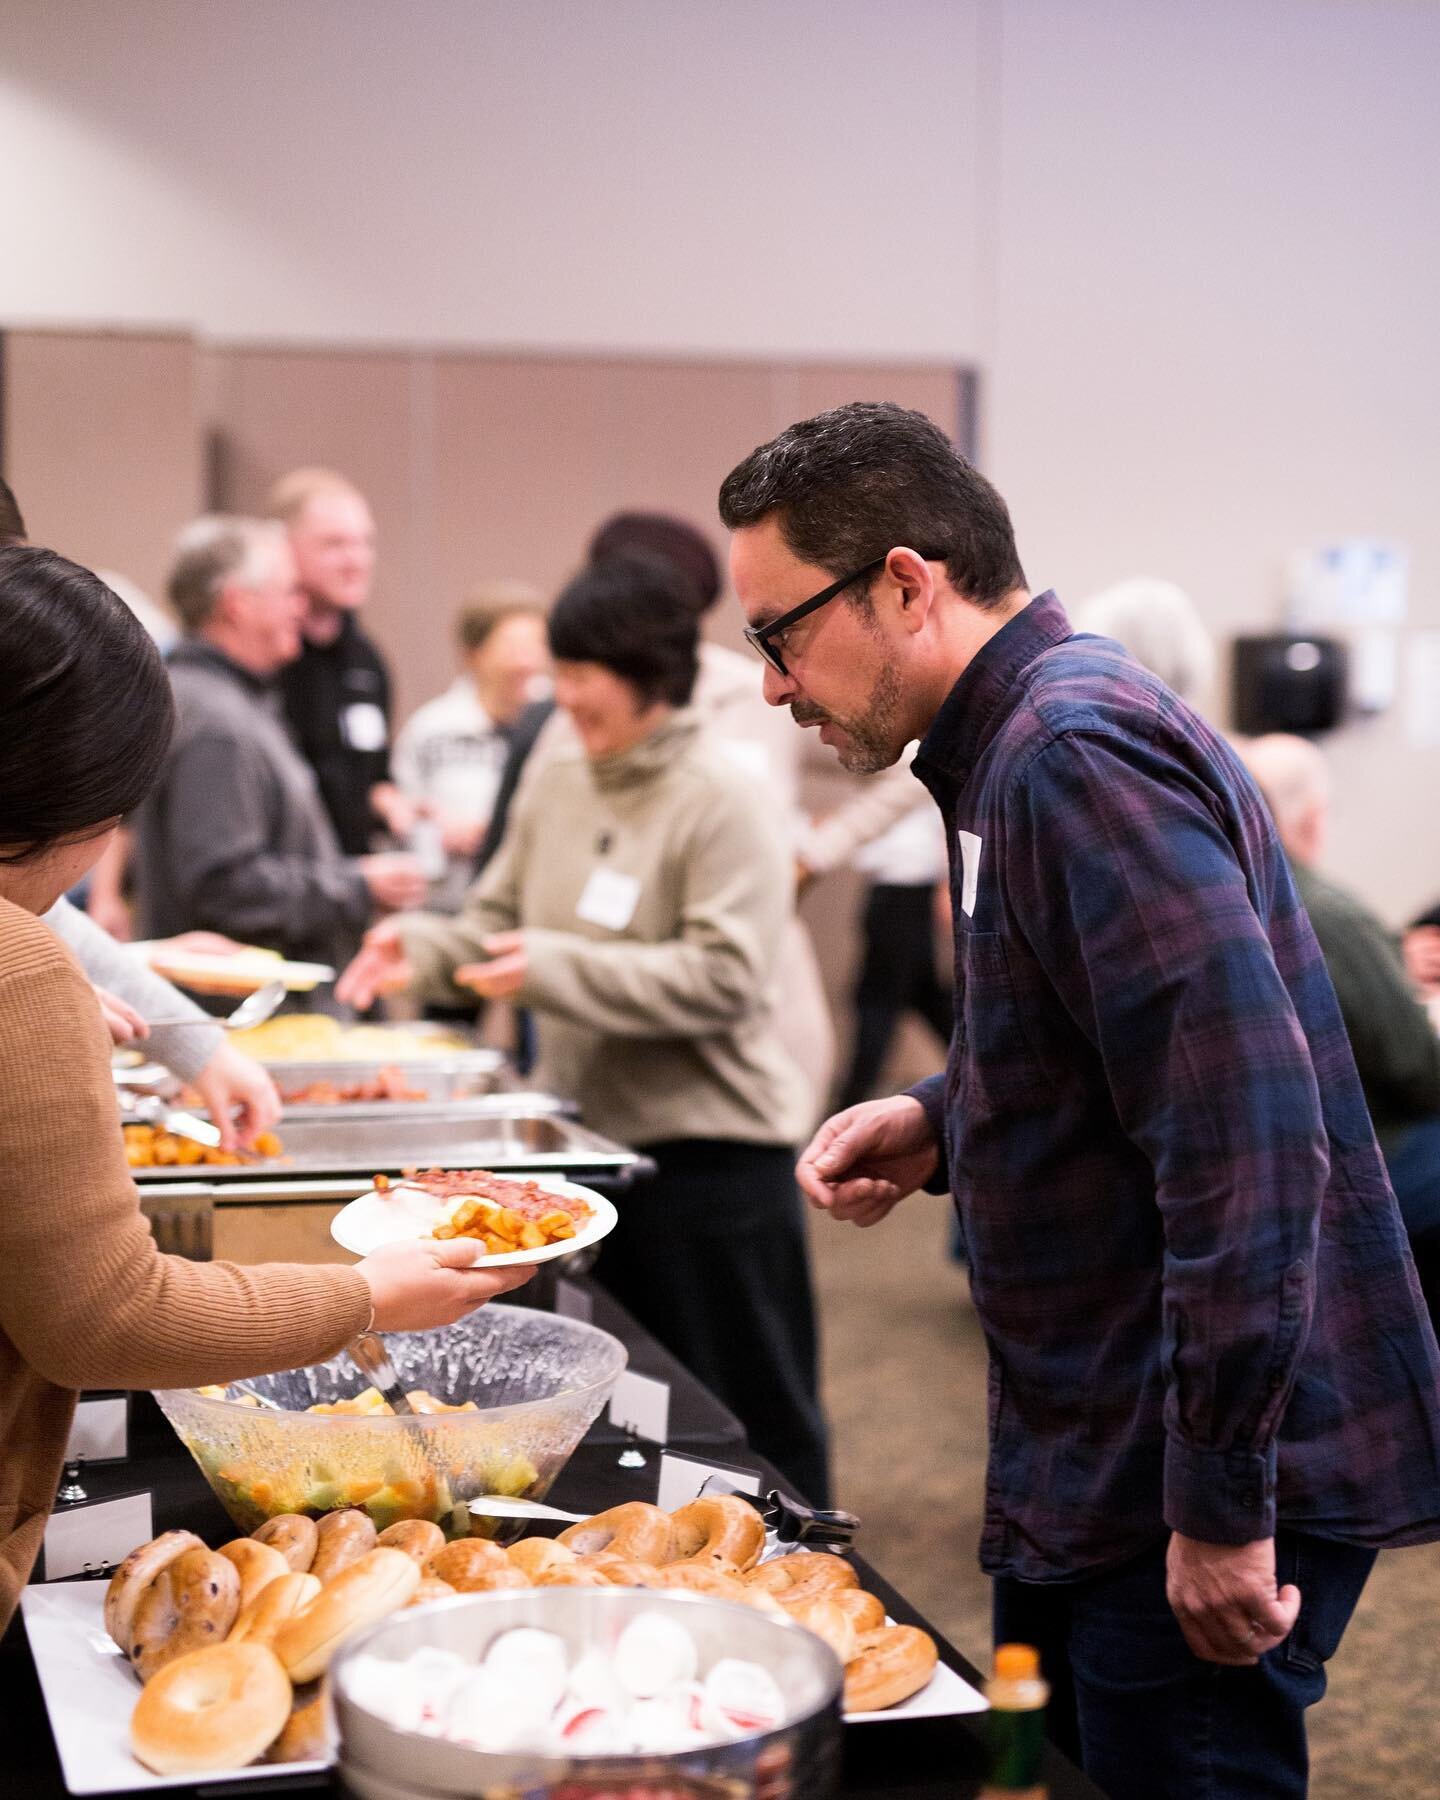 We are a community that believes in the power of sharing a meal together as Jesus modeled in His ministry. Join us this Sunday, April 23rd at 10am, as we gather to worship and spend time around the table sharing breakfast! This is a great opportunity